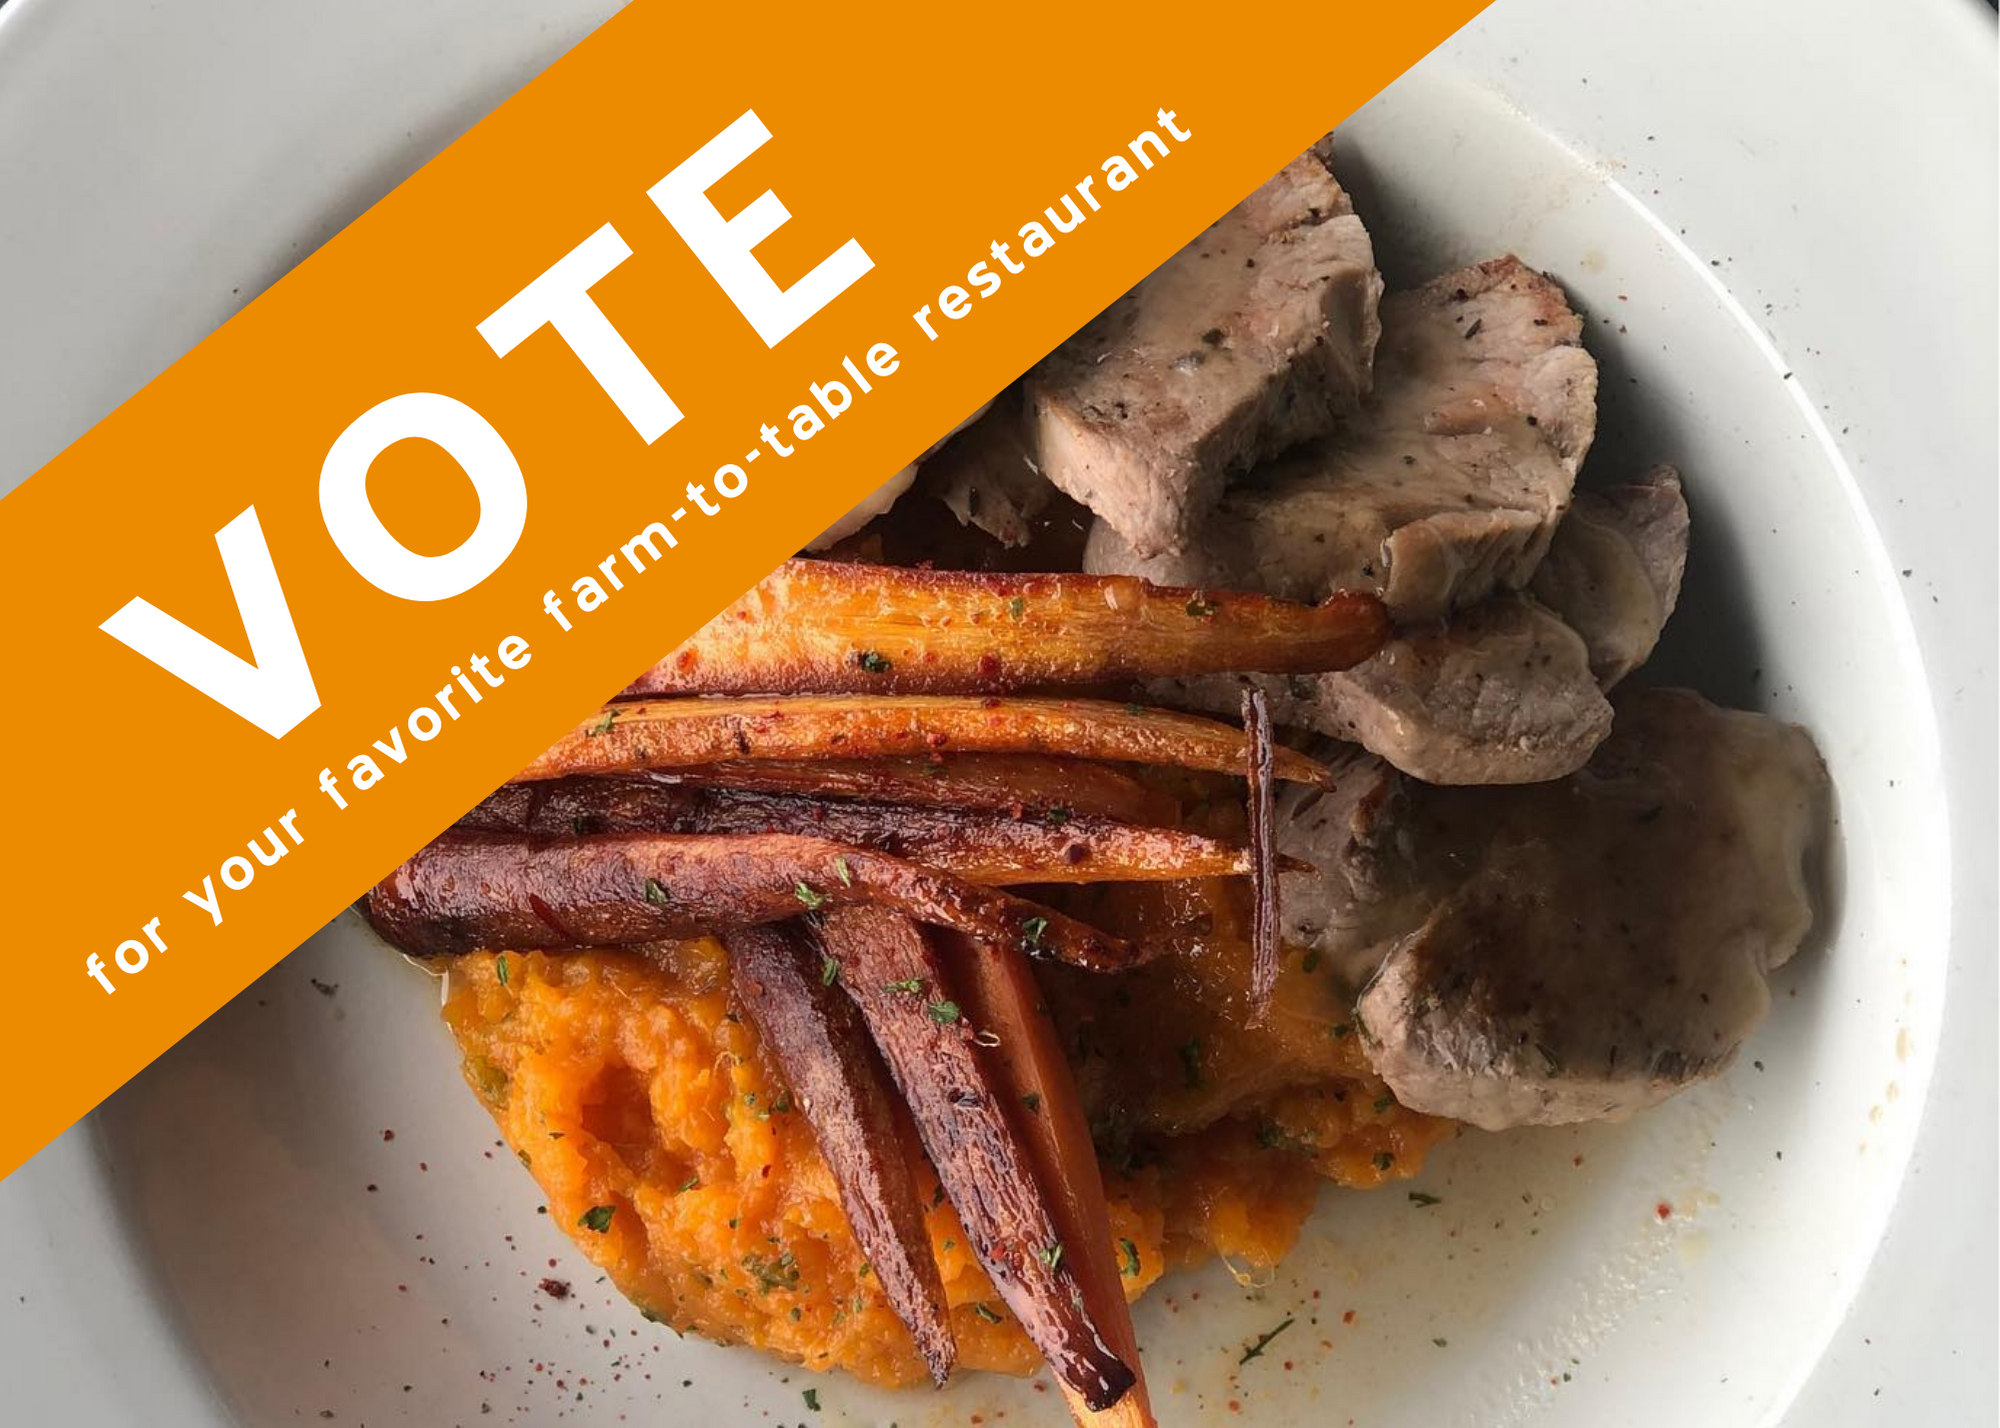 Voting Now Open For The  Illinois Favorite Farm-to-Table Restaurant Awards